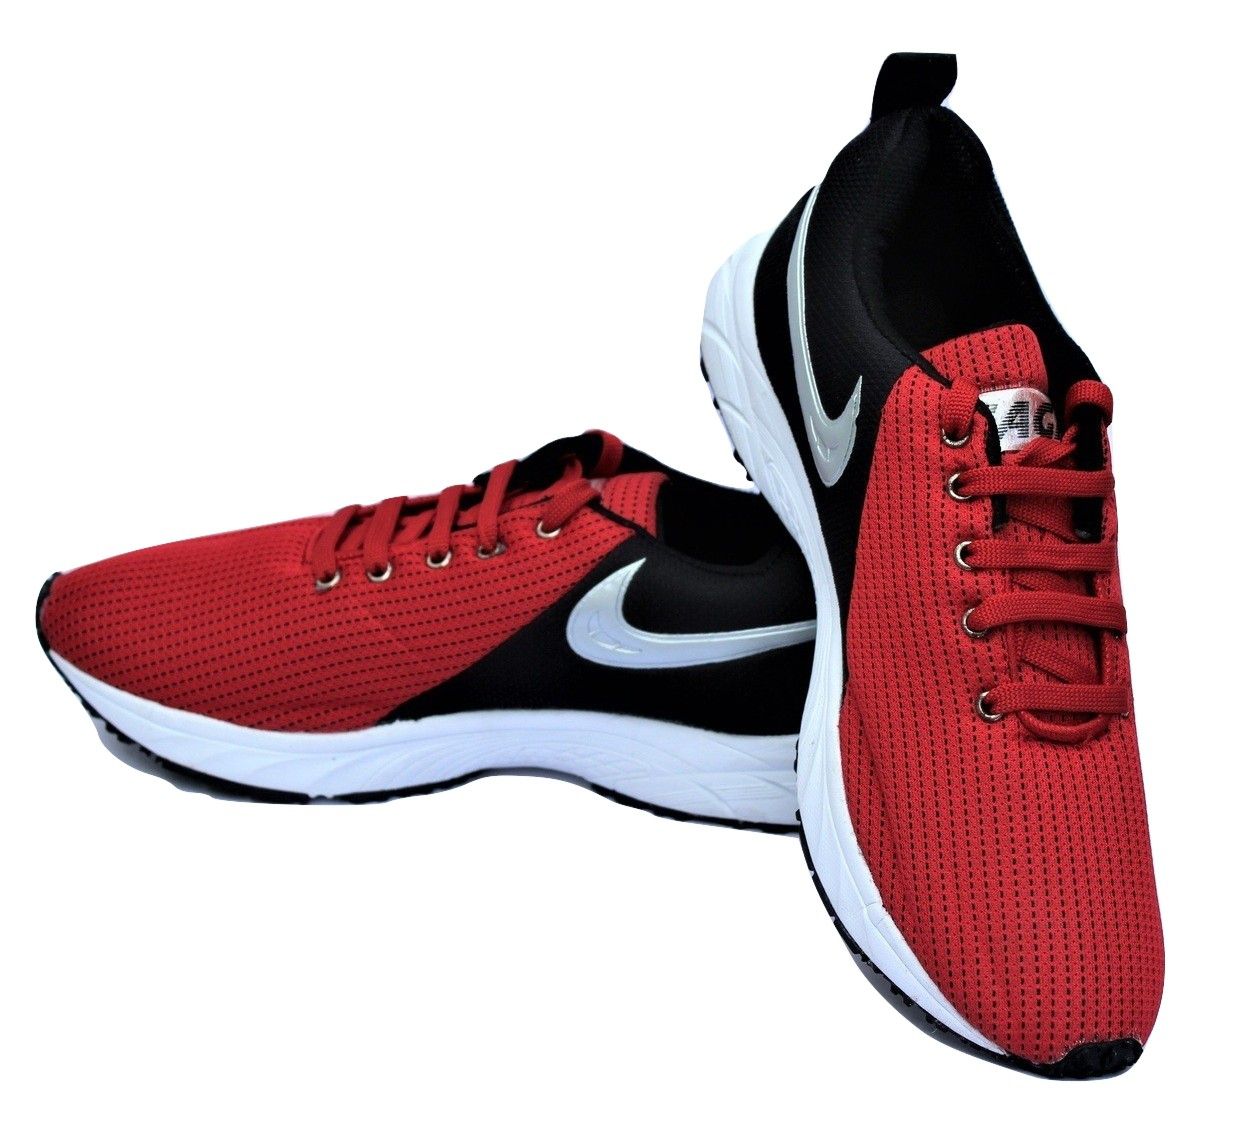 Rw Sega Red Black With Nike Sign Running Shoes Buy Online At Best Price On Snapdeal